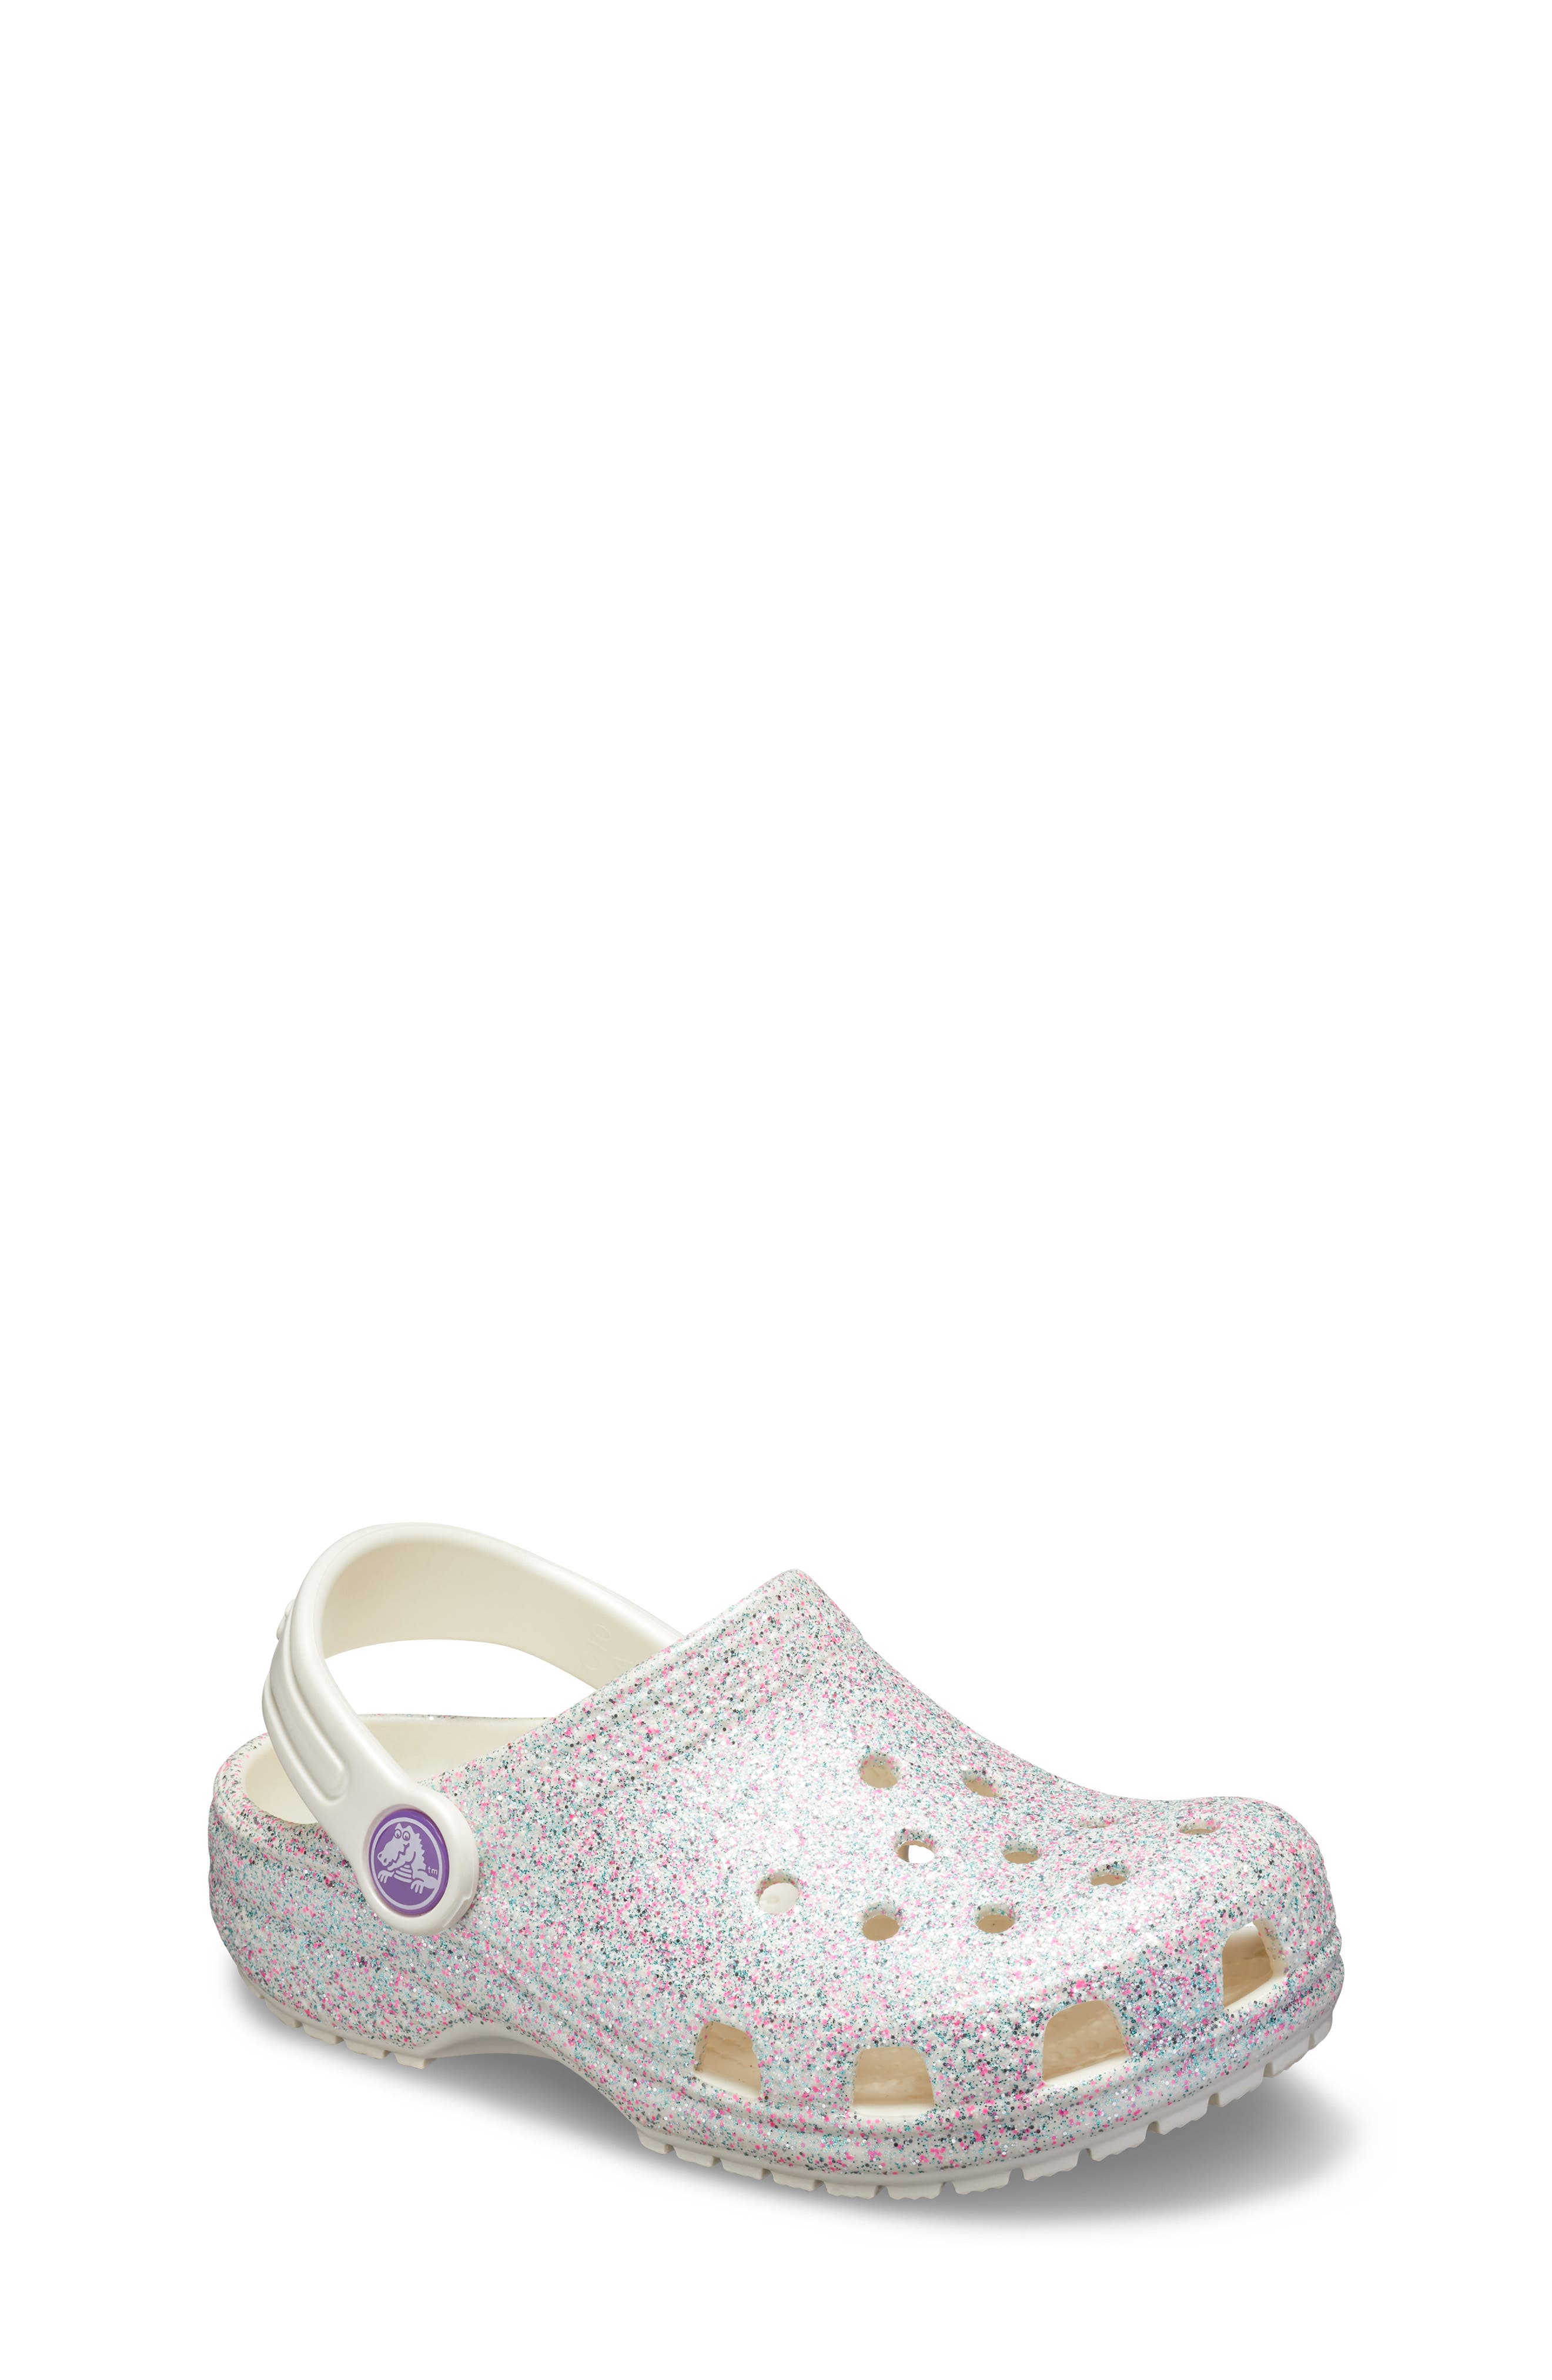 Little Girls' Clogs Shoes (Sizes 12.5-3)